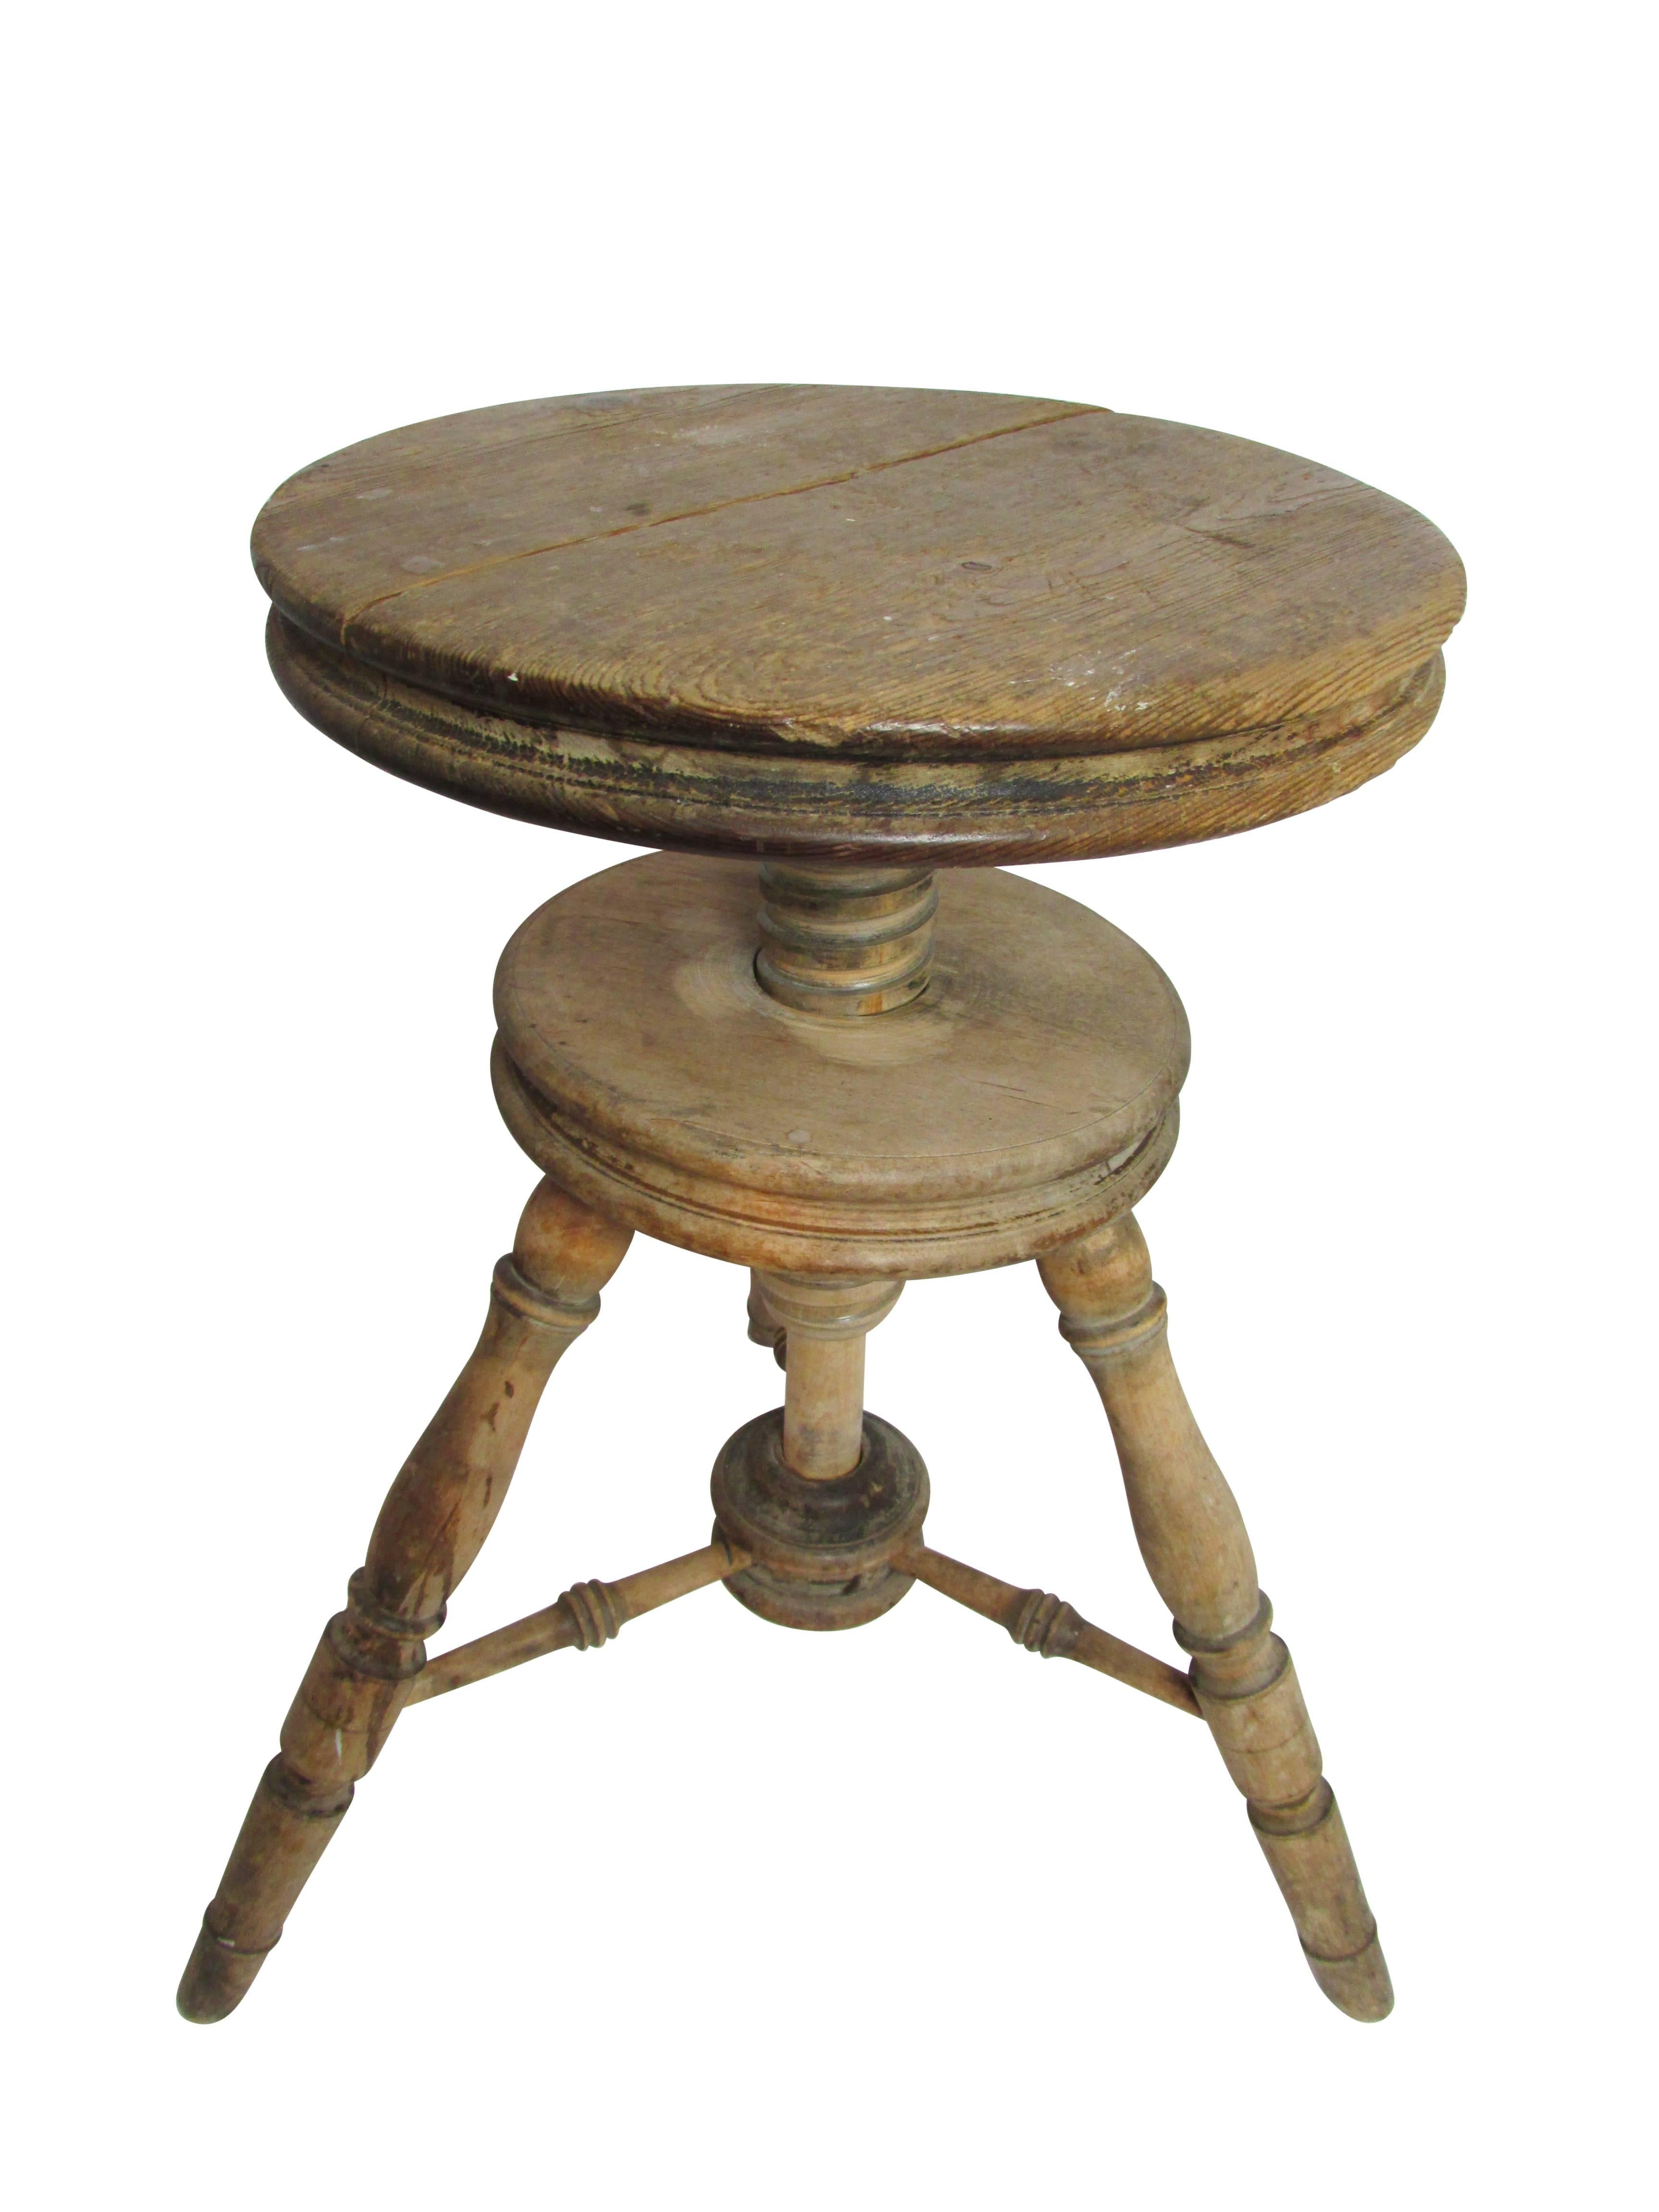 This is a late 19th century adjustable pine music stool from Sweden.
Measures:
23.5